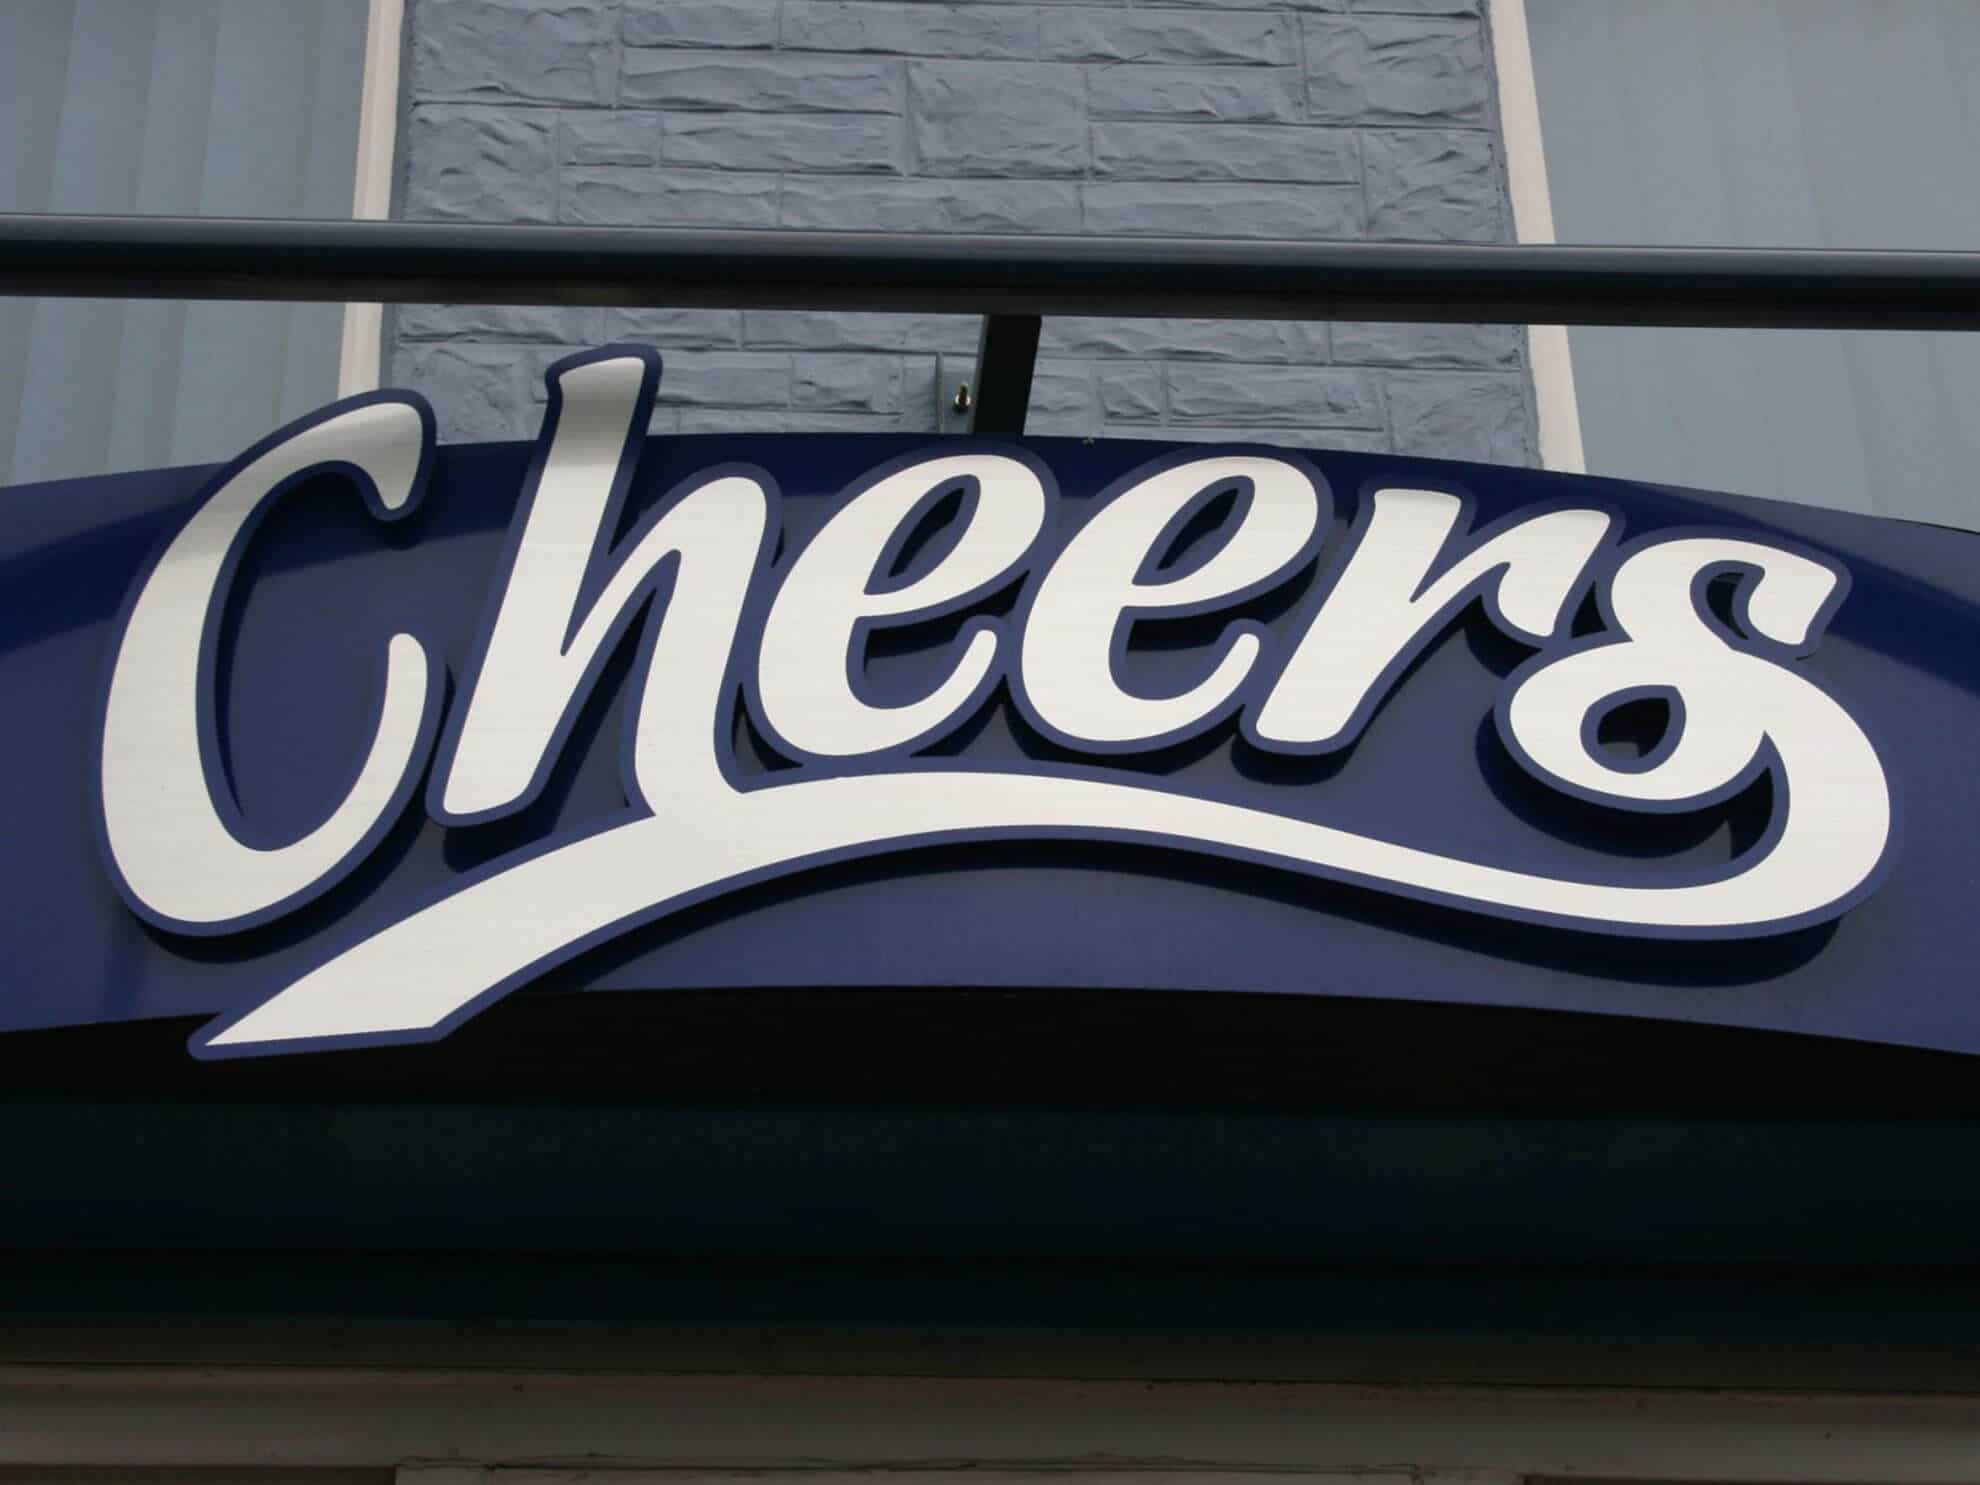 Cheers sign - Illuminated stand off letters